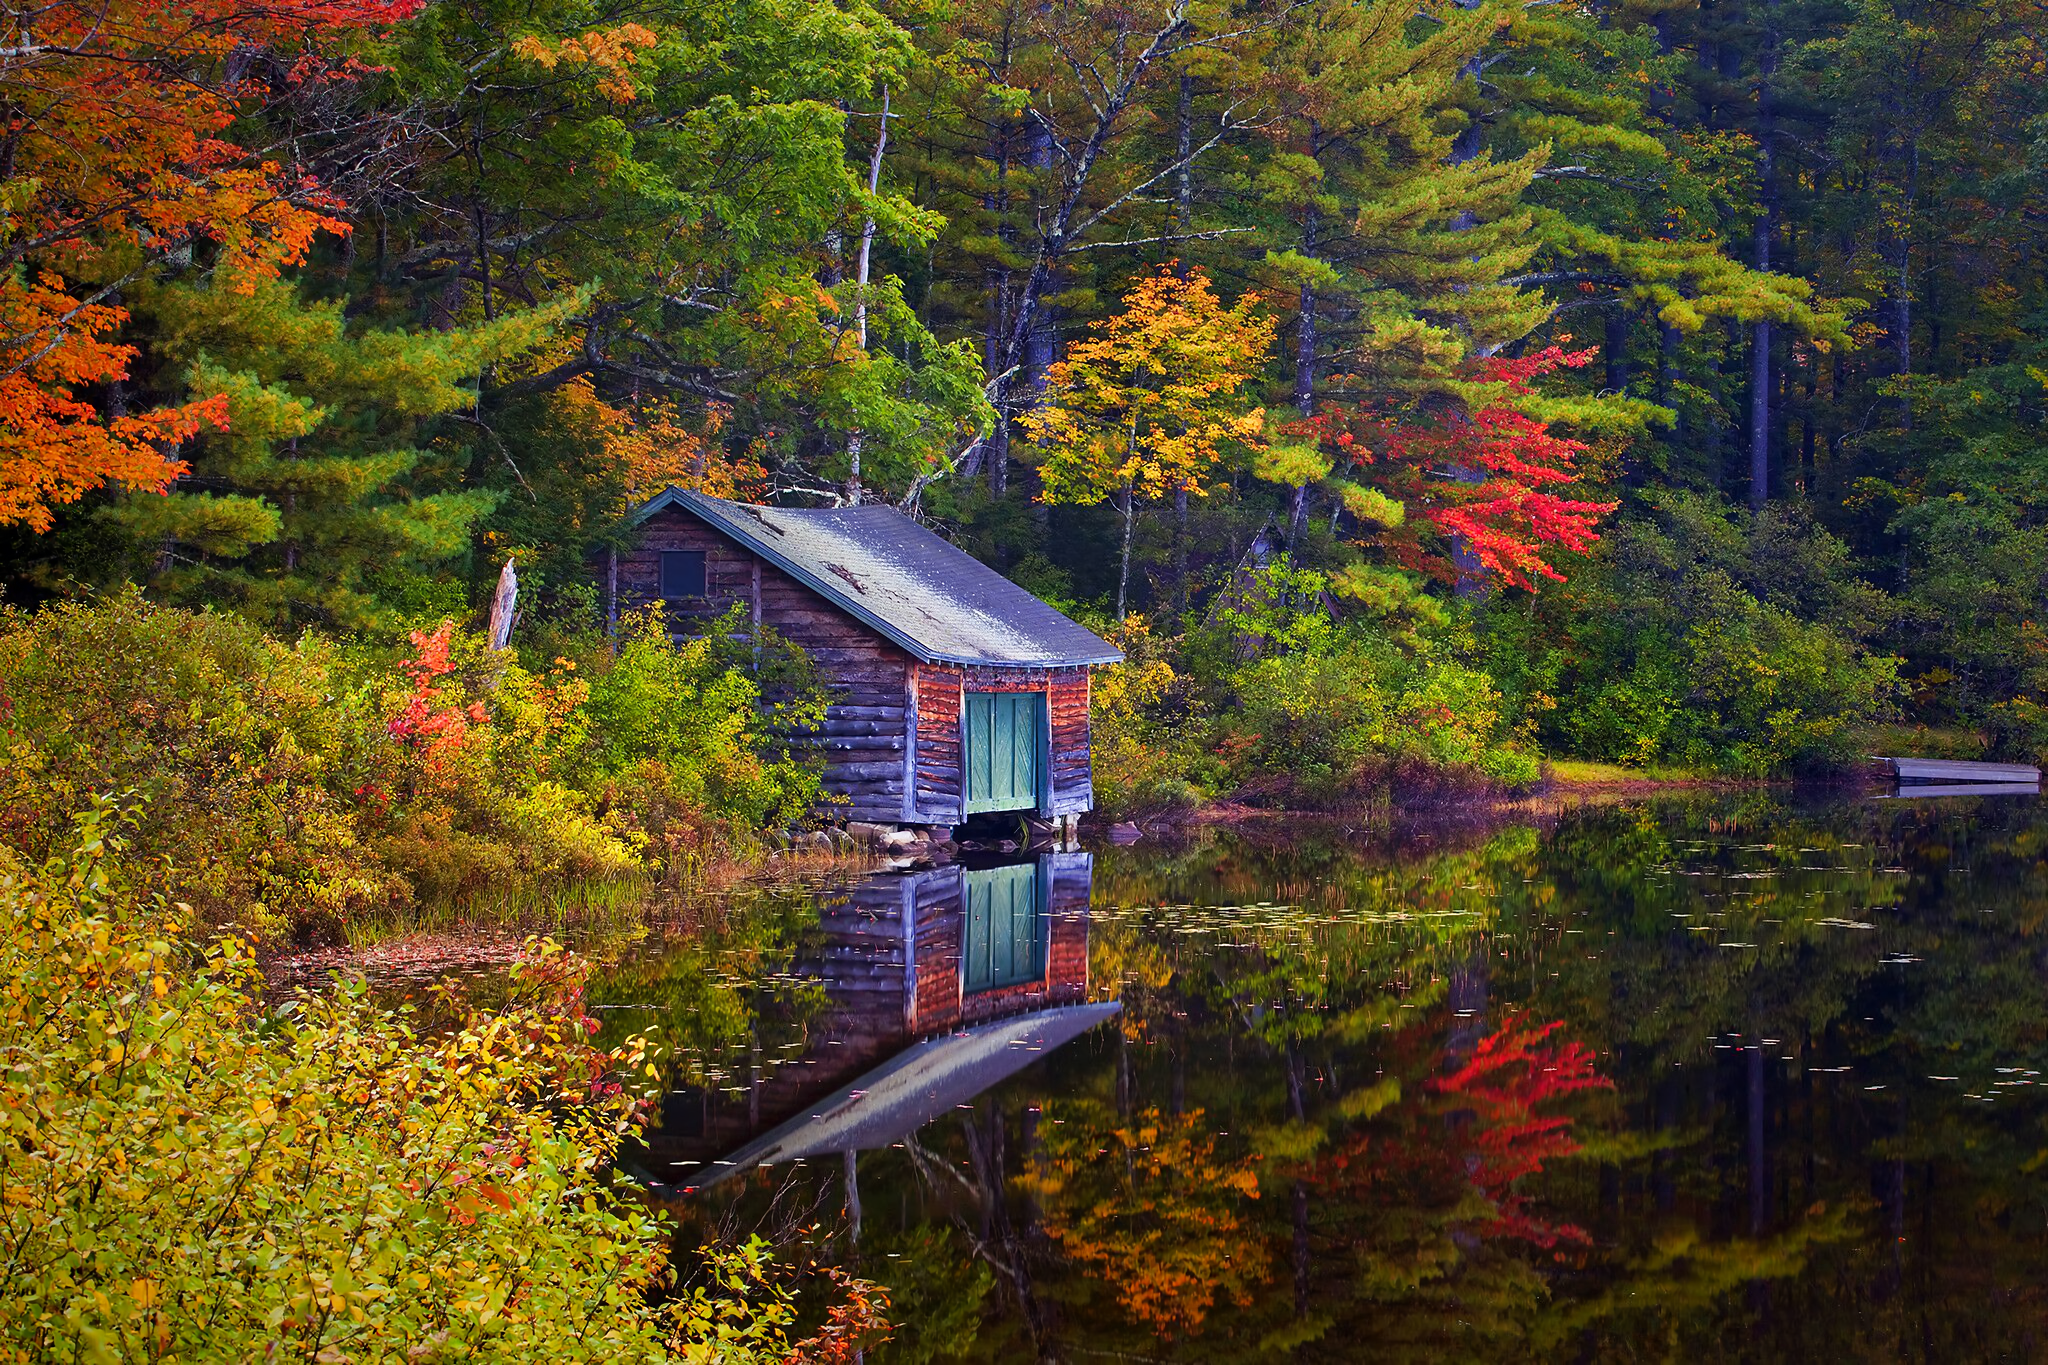 Autumn Cabin Wallpapers